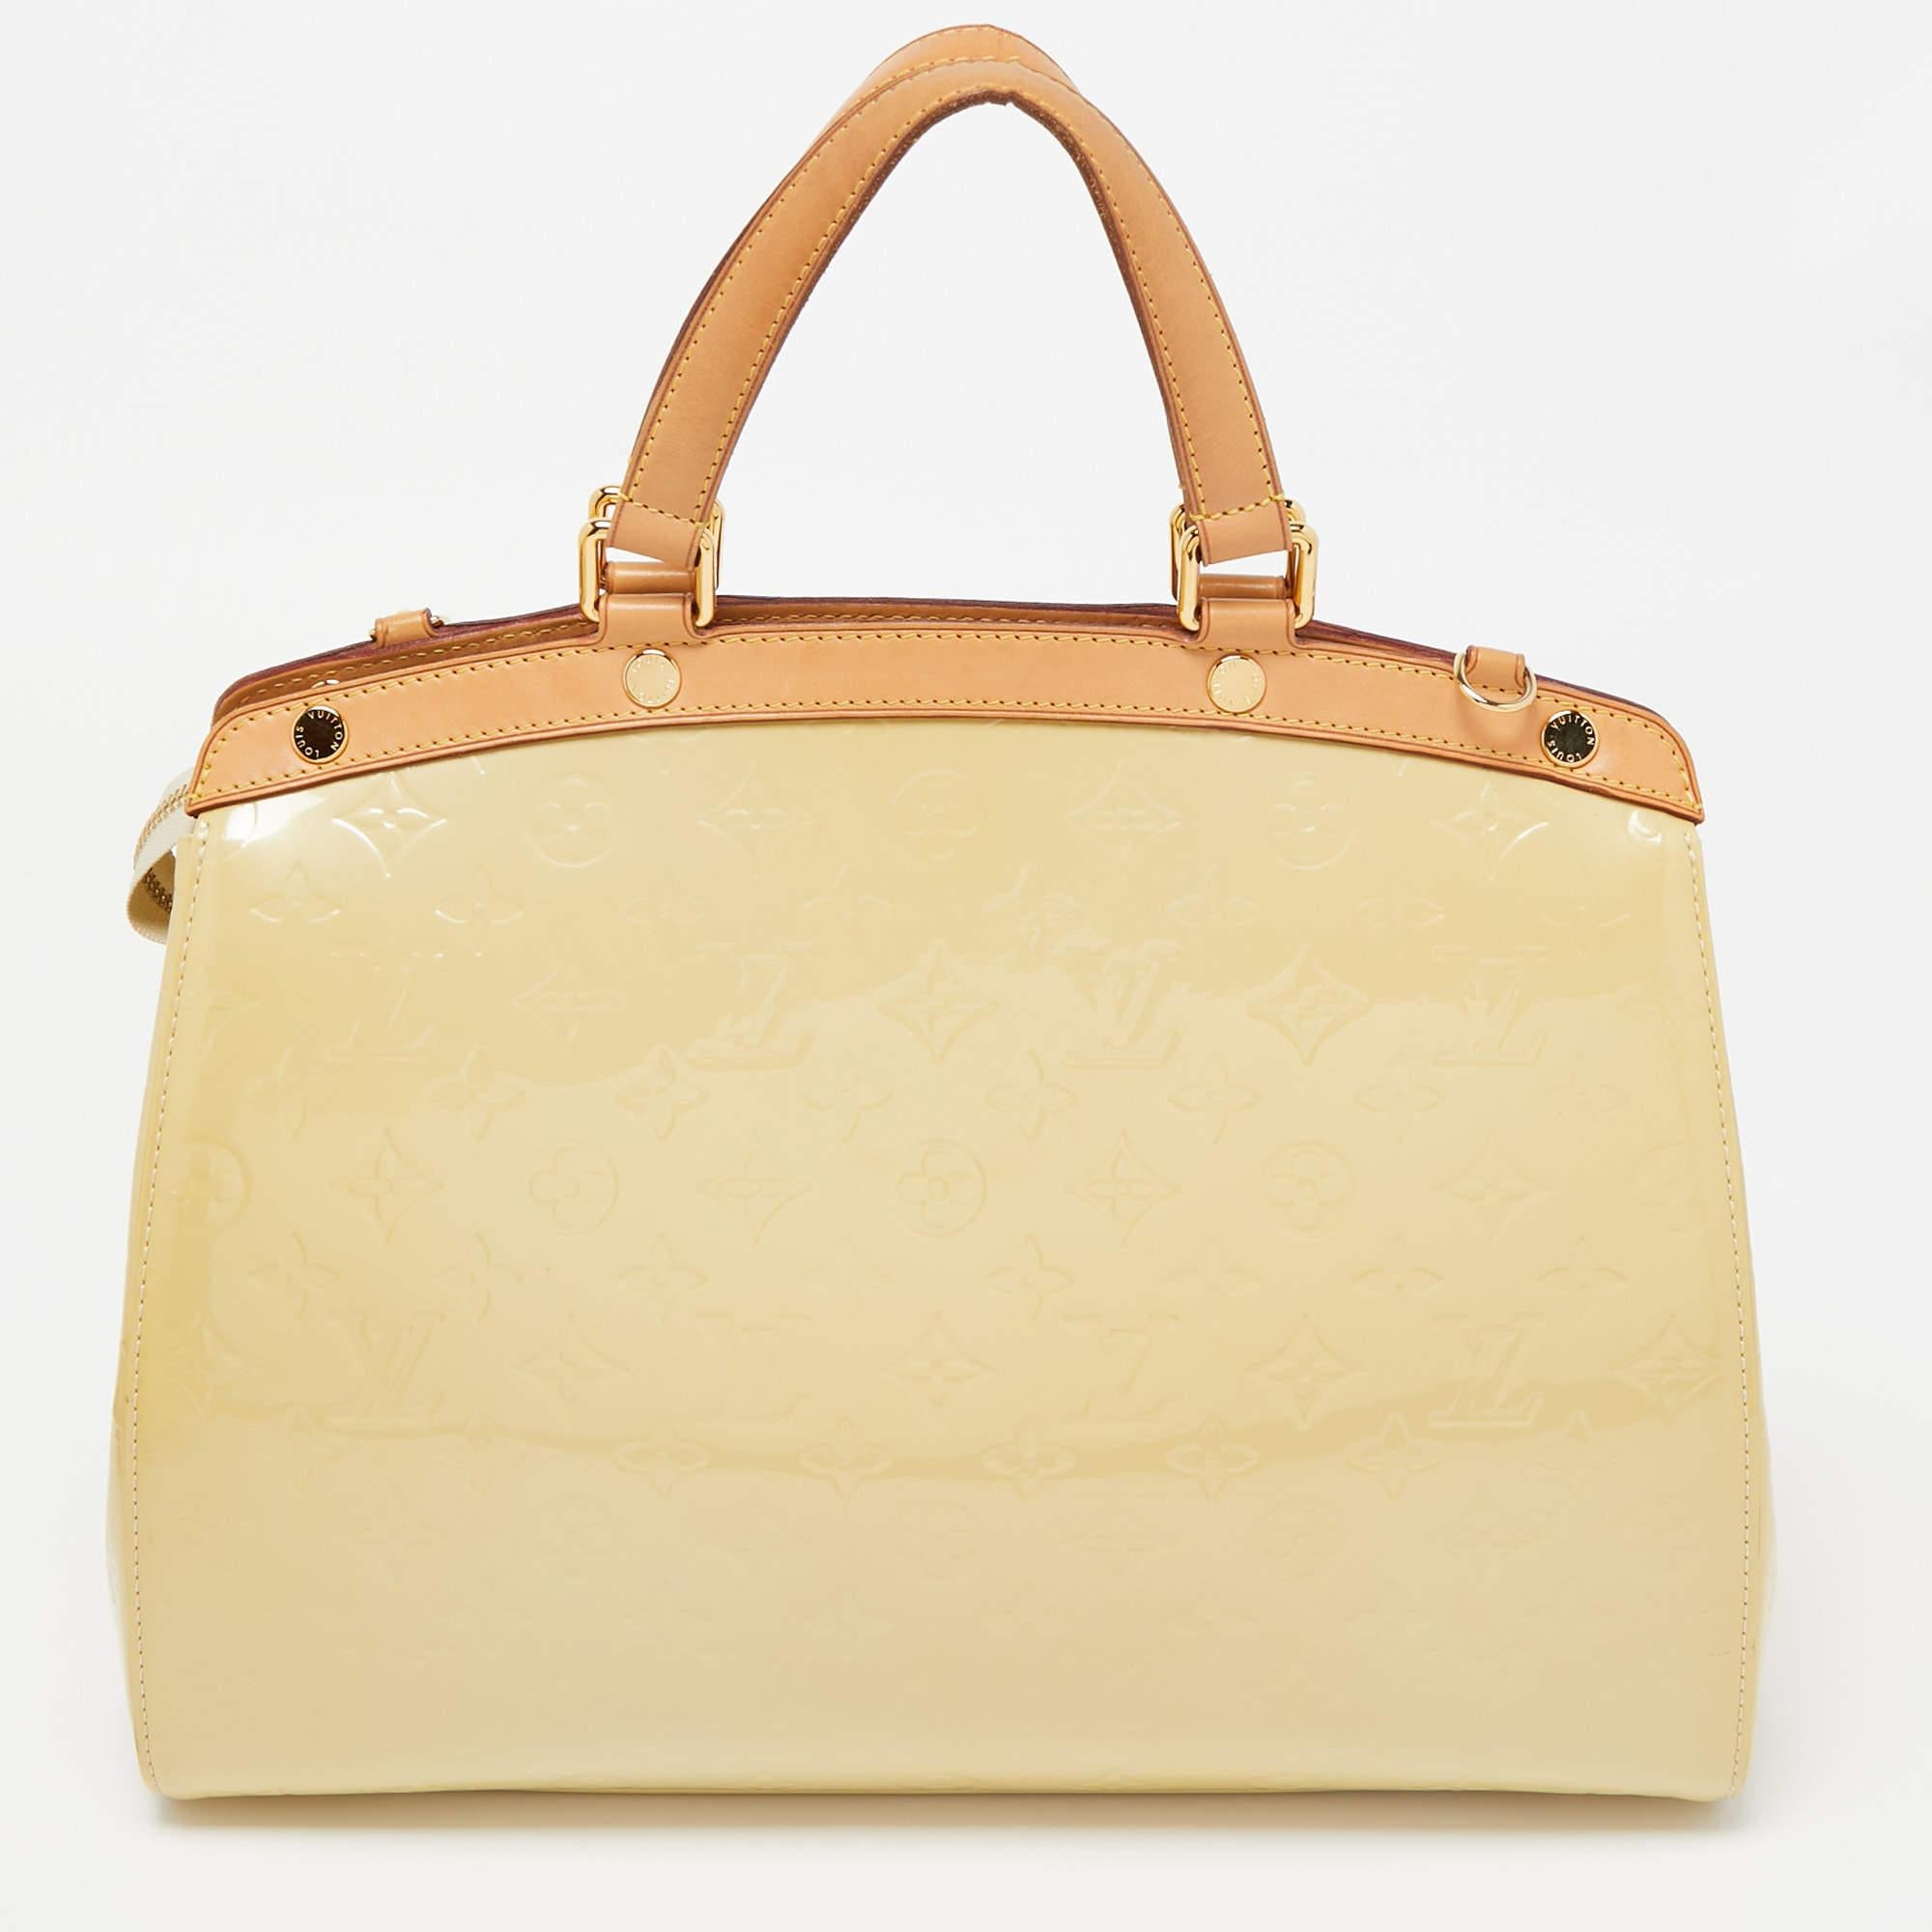 This Brea GM bag from the House of Louis Vuitton will definitely sway you away with its precise shape, style, and design. It is made from Blanc Corail Monogram Vernis into a structured, neat silhouette. It flaunts gold-toned fittings, dual top